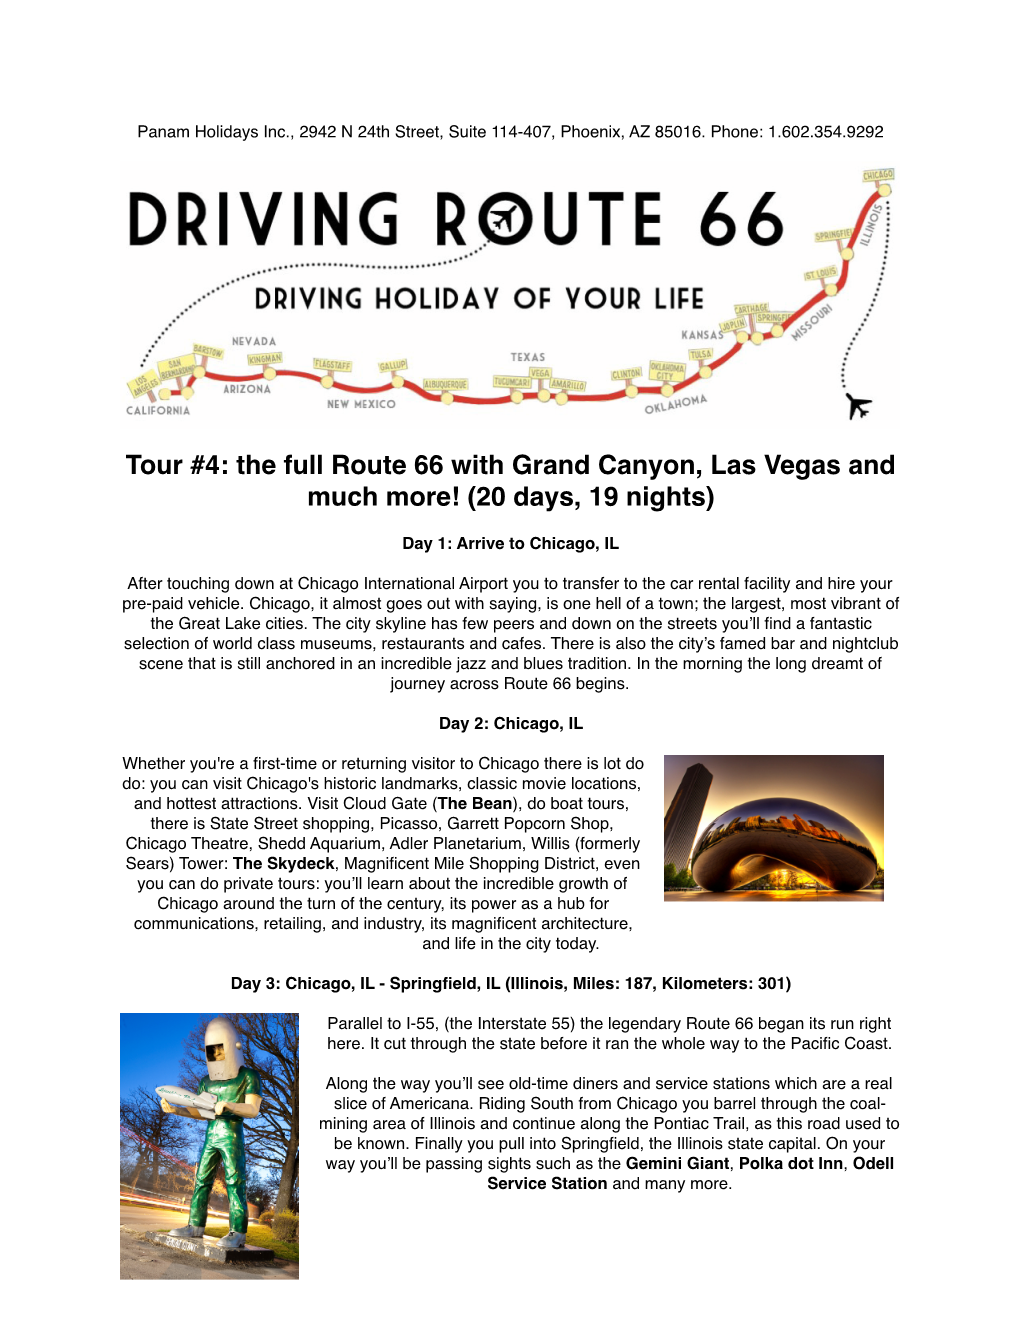 Tour #4: the Full Route 66 with Grand Canyon, Las Vegas and Much More! (20 Days, 19 Nights)